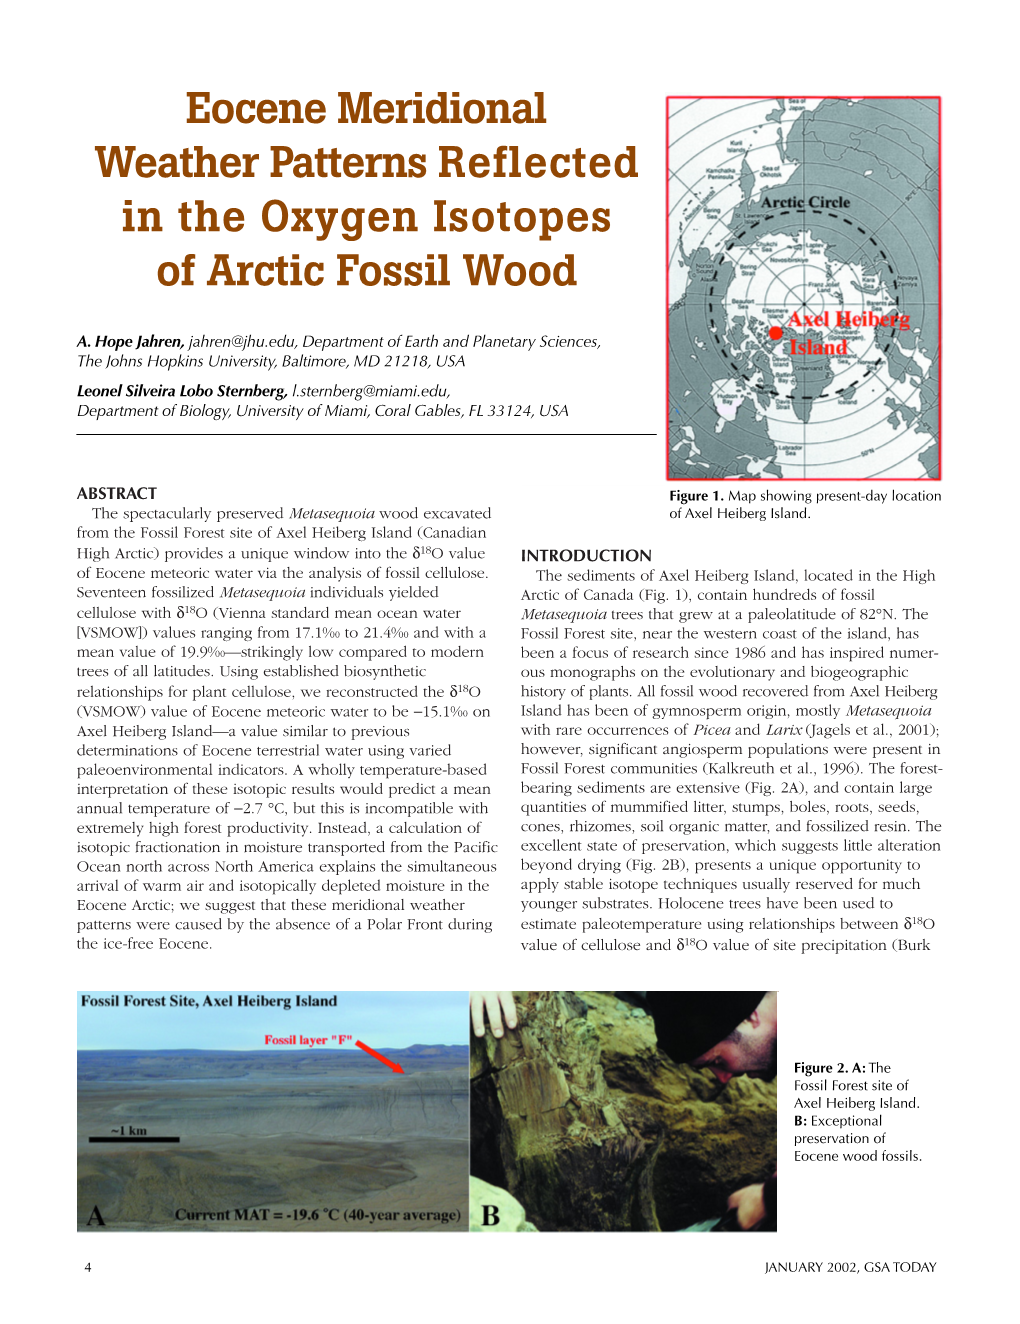 Eocene Meridional Weather Patterns Reflected in the Oxygen Isotopes of Arctic Fossil Wood